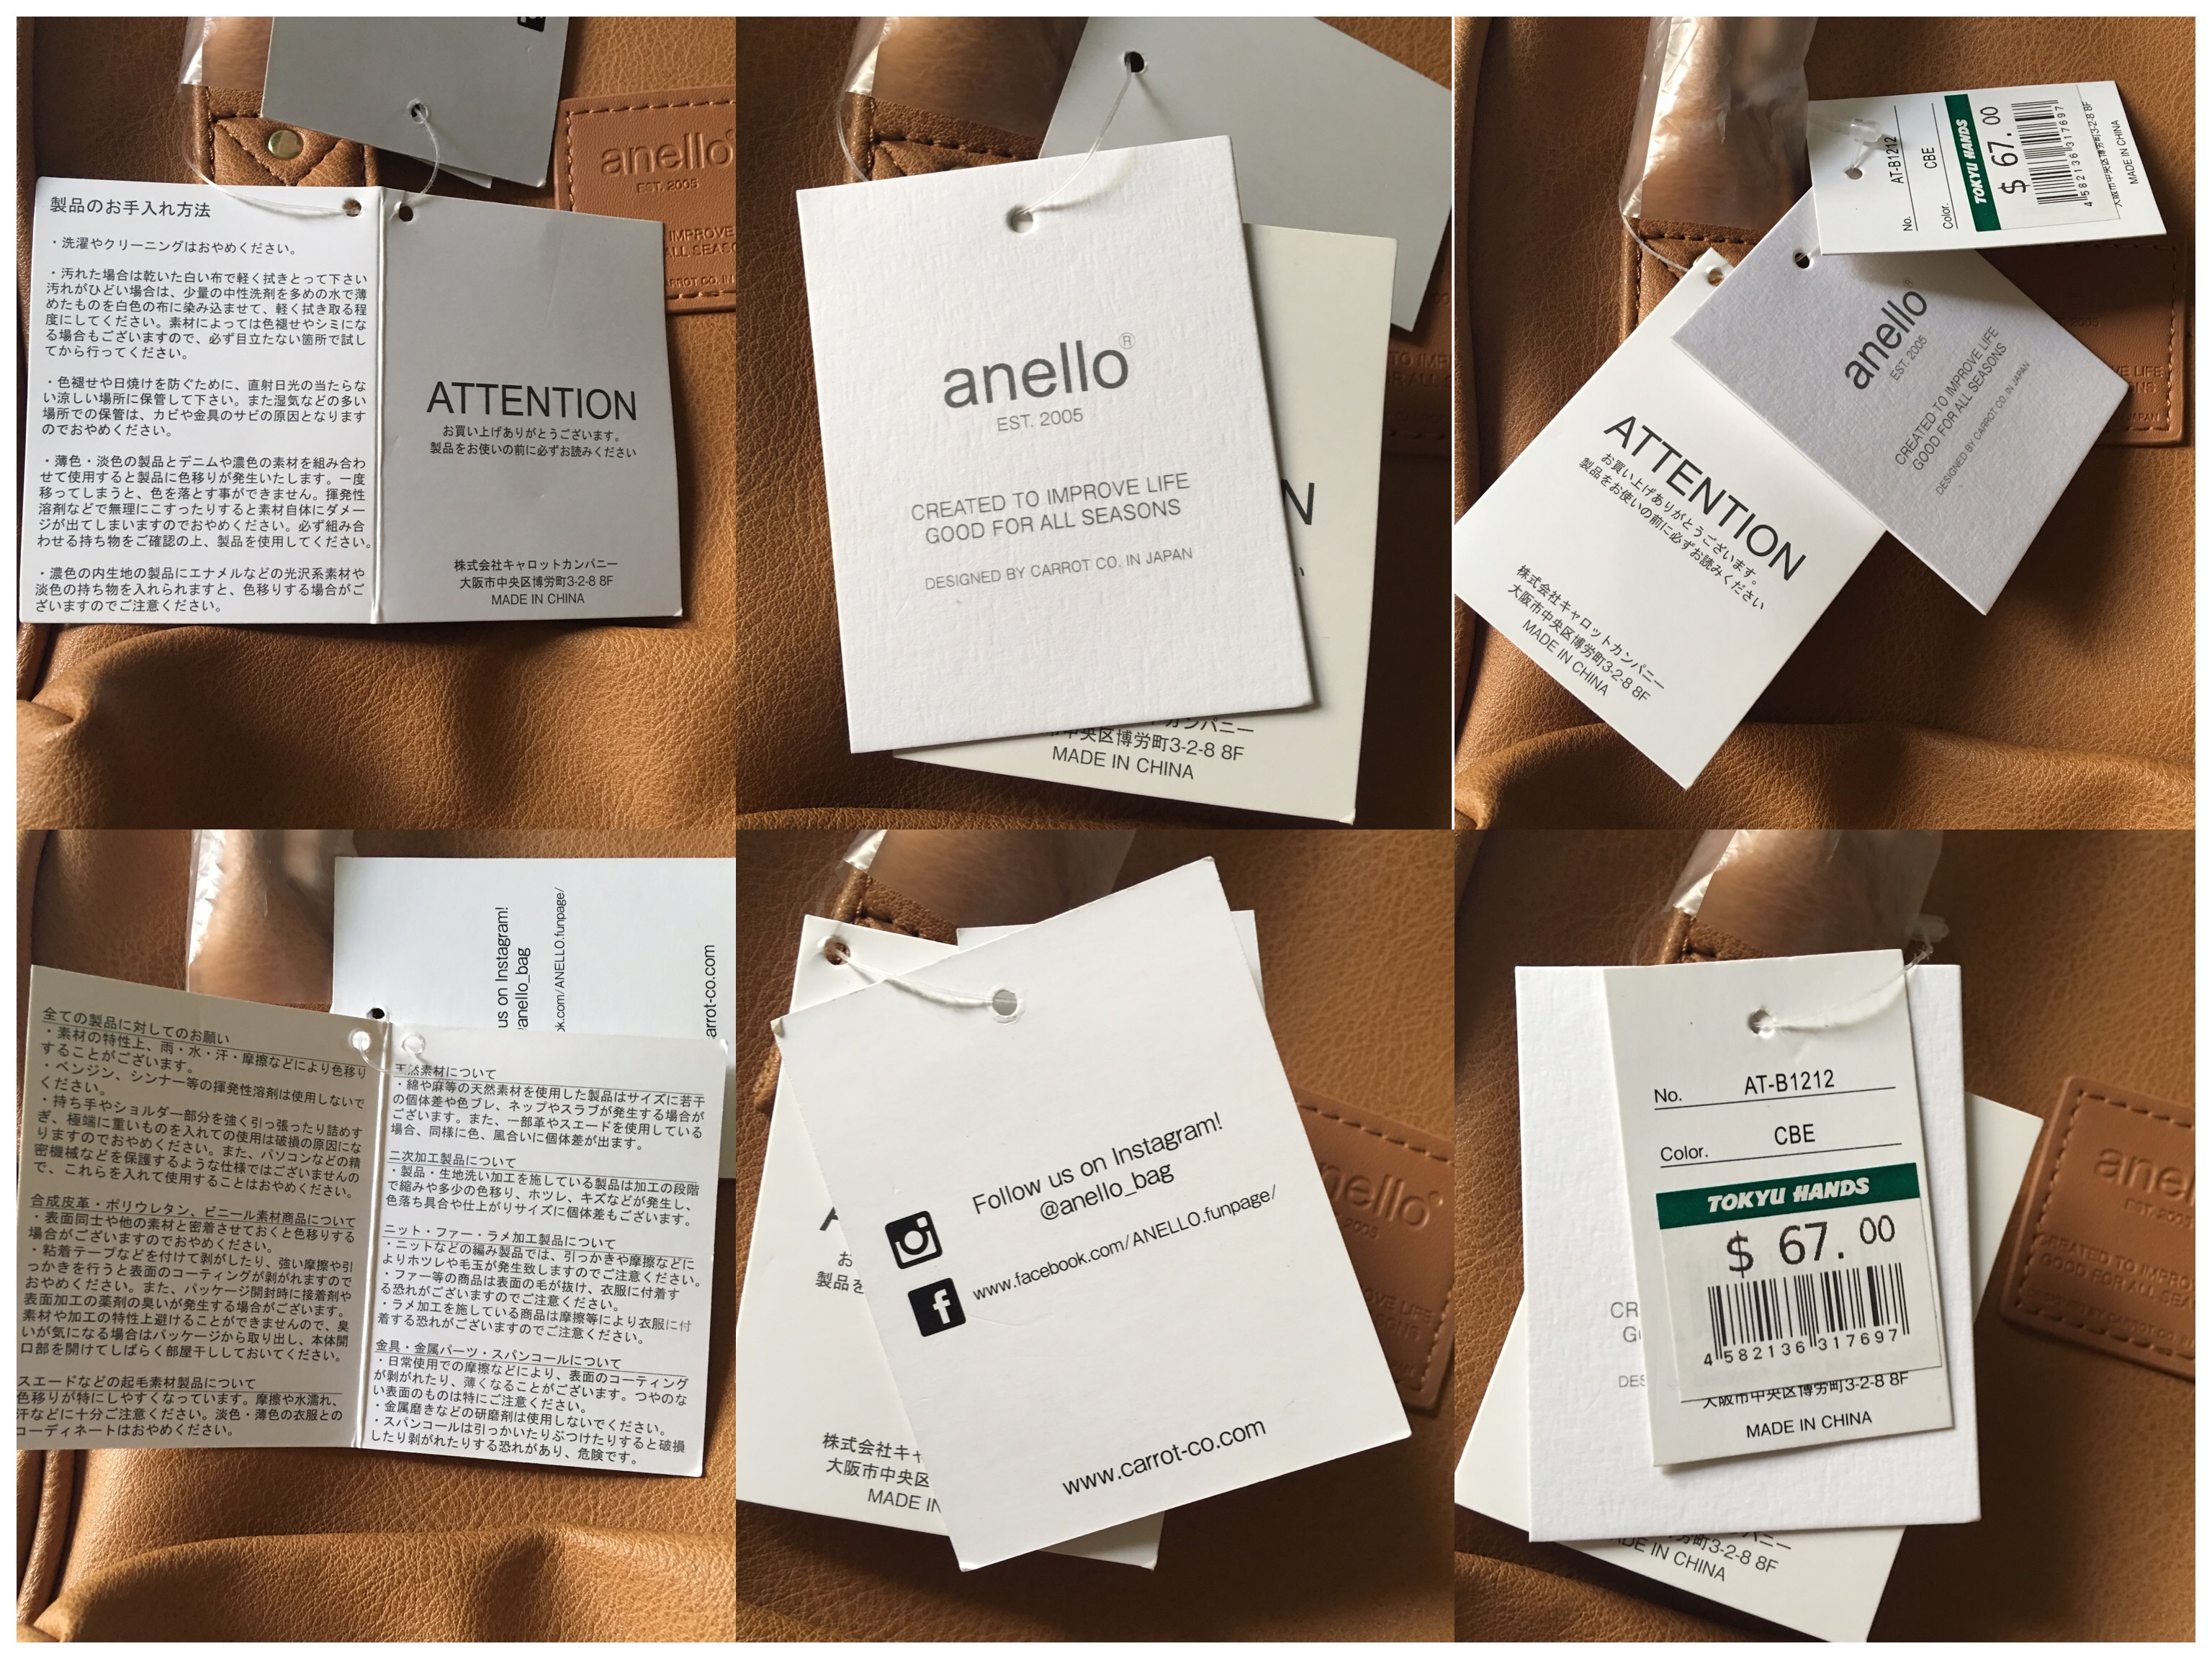 Real or Fake: How do I know if my Anello Bag is Authentic